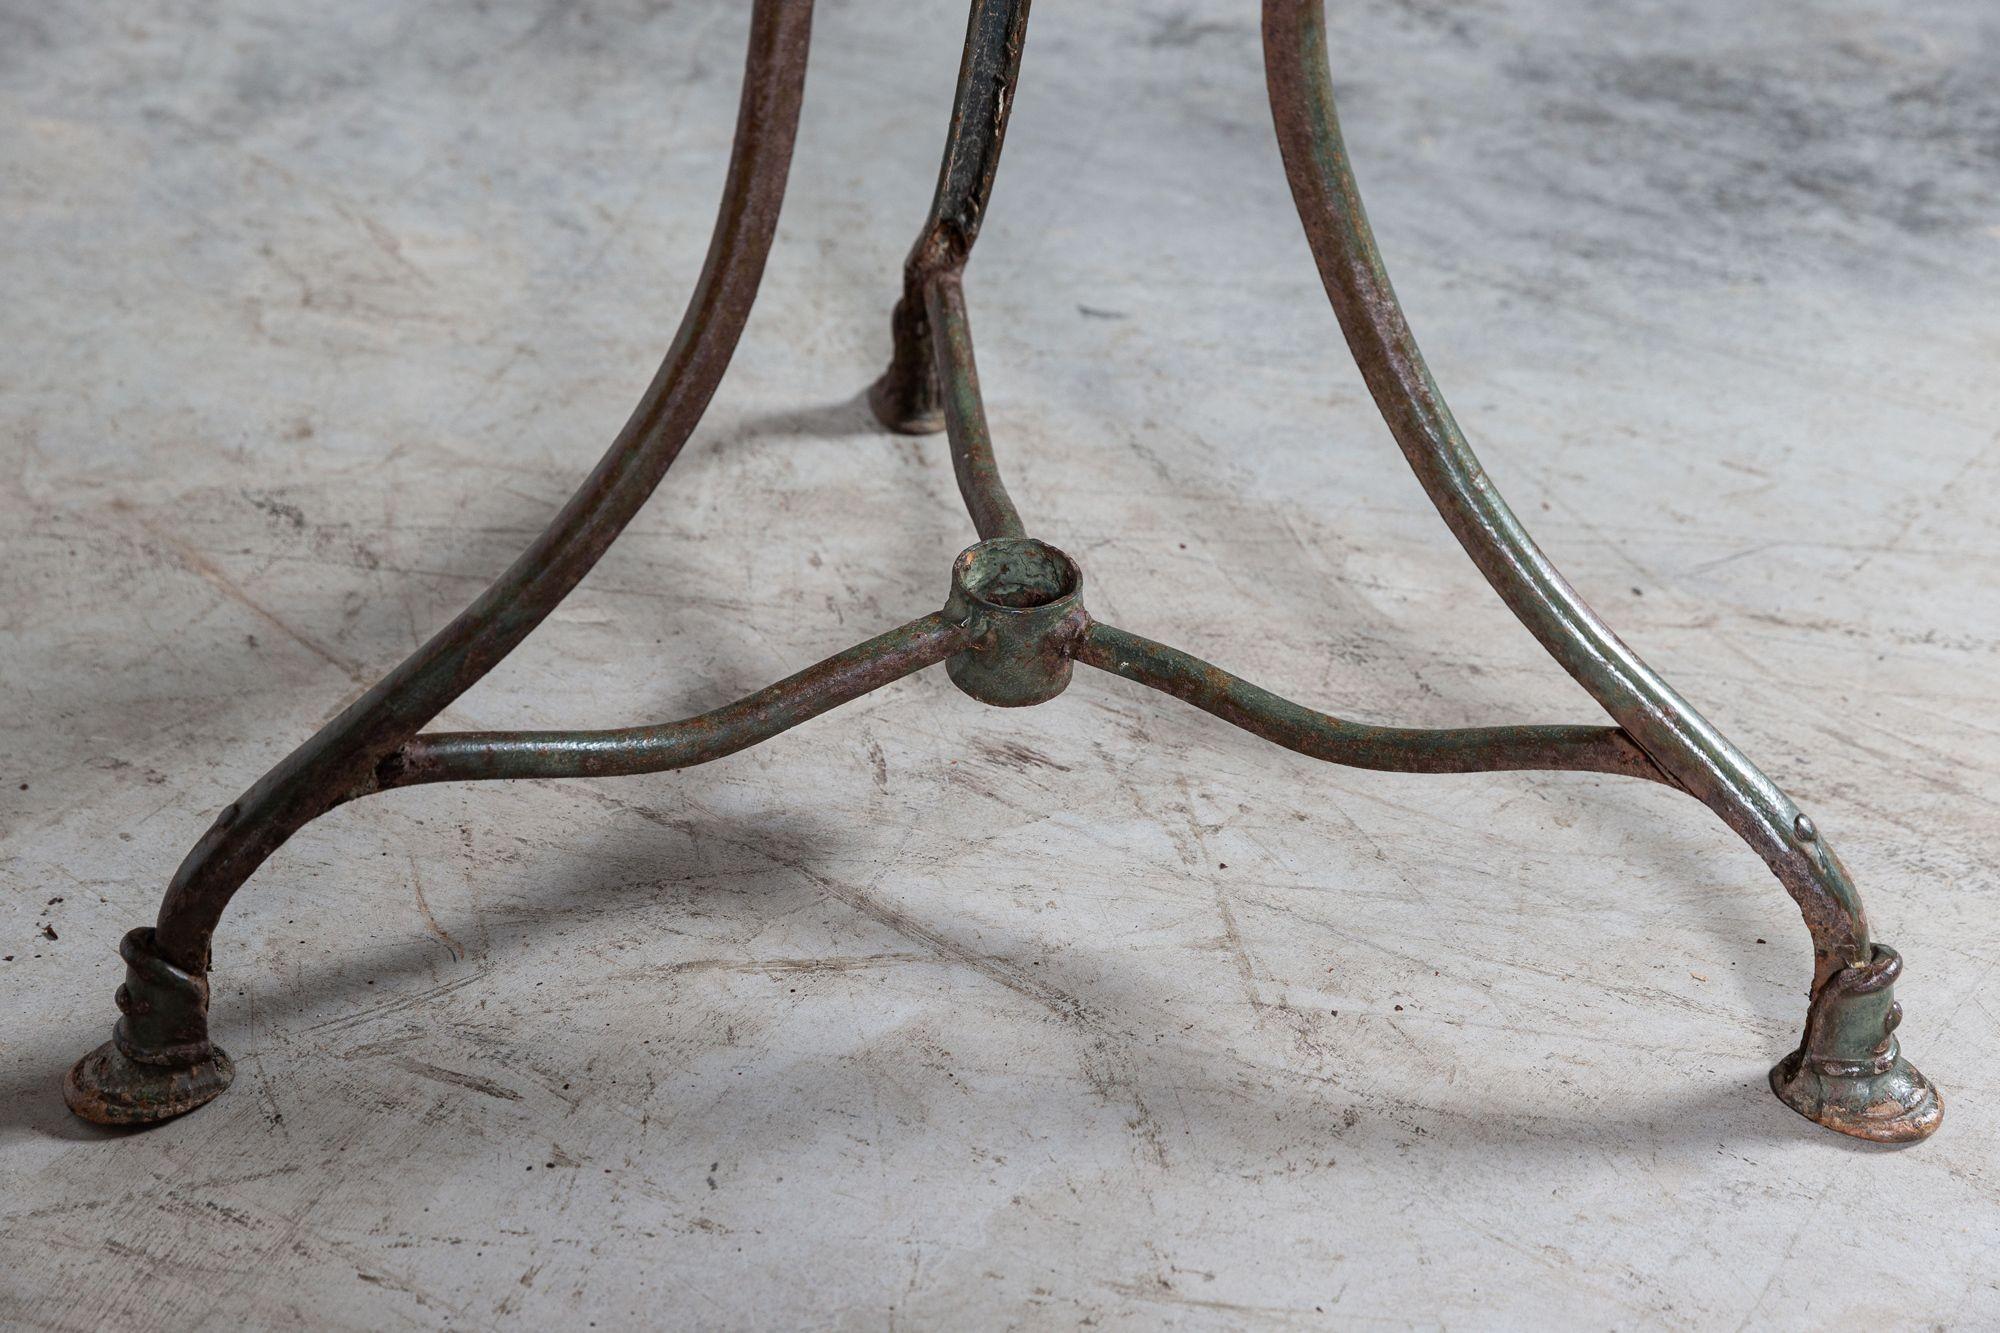 circa 1910.
French painted arras iron side table.
sku 1353.
Measures: W71 x D71 x H70 cm